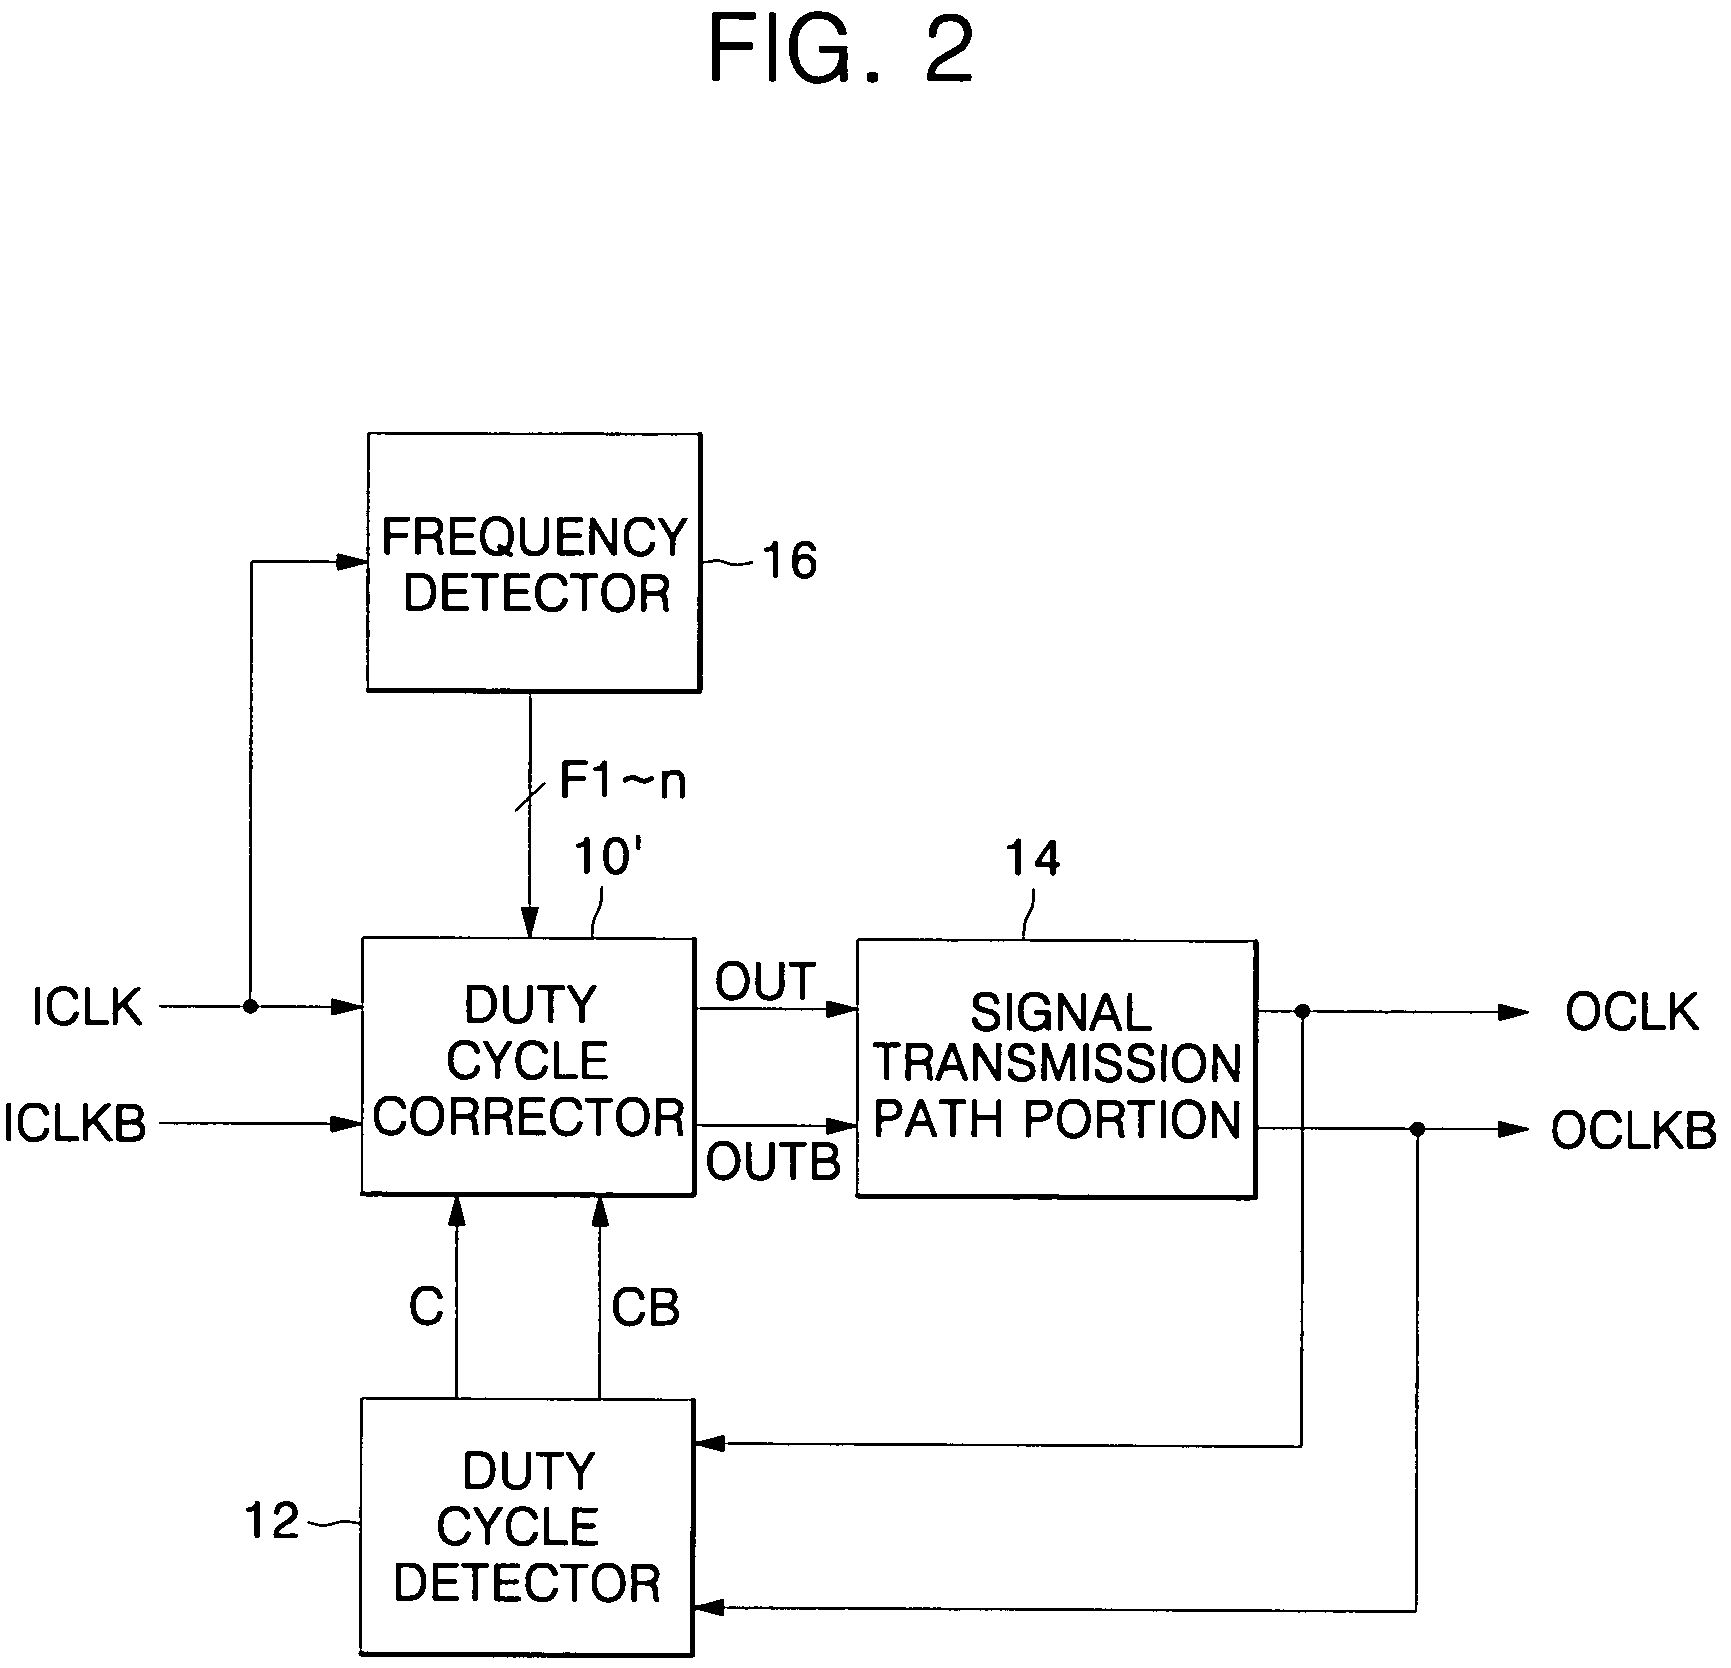 Duty cycle correcting circuits having a variable gain and methods of operating the same